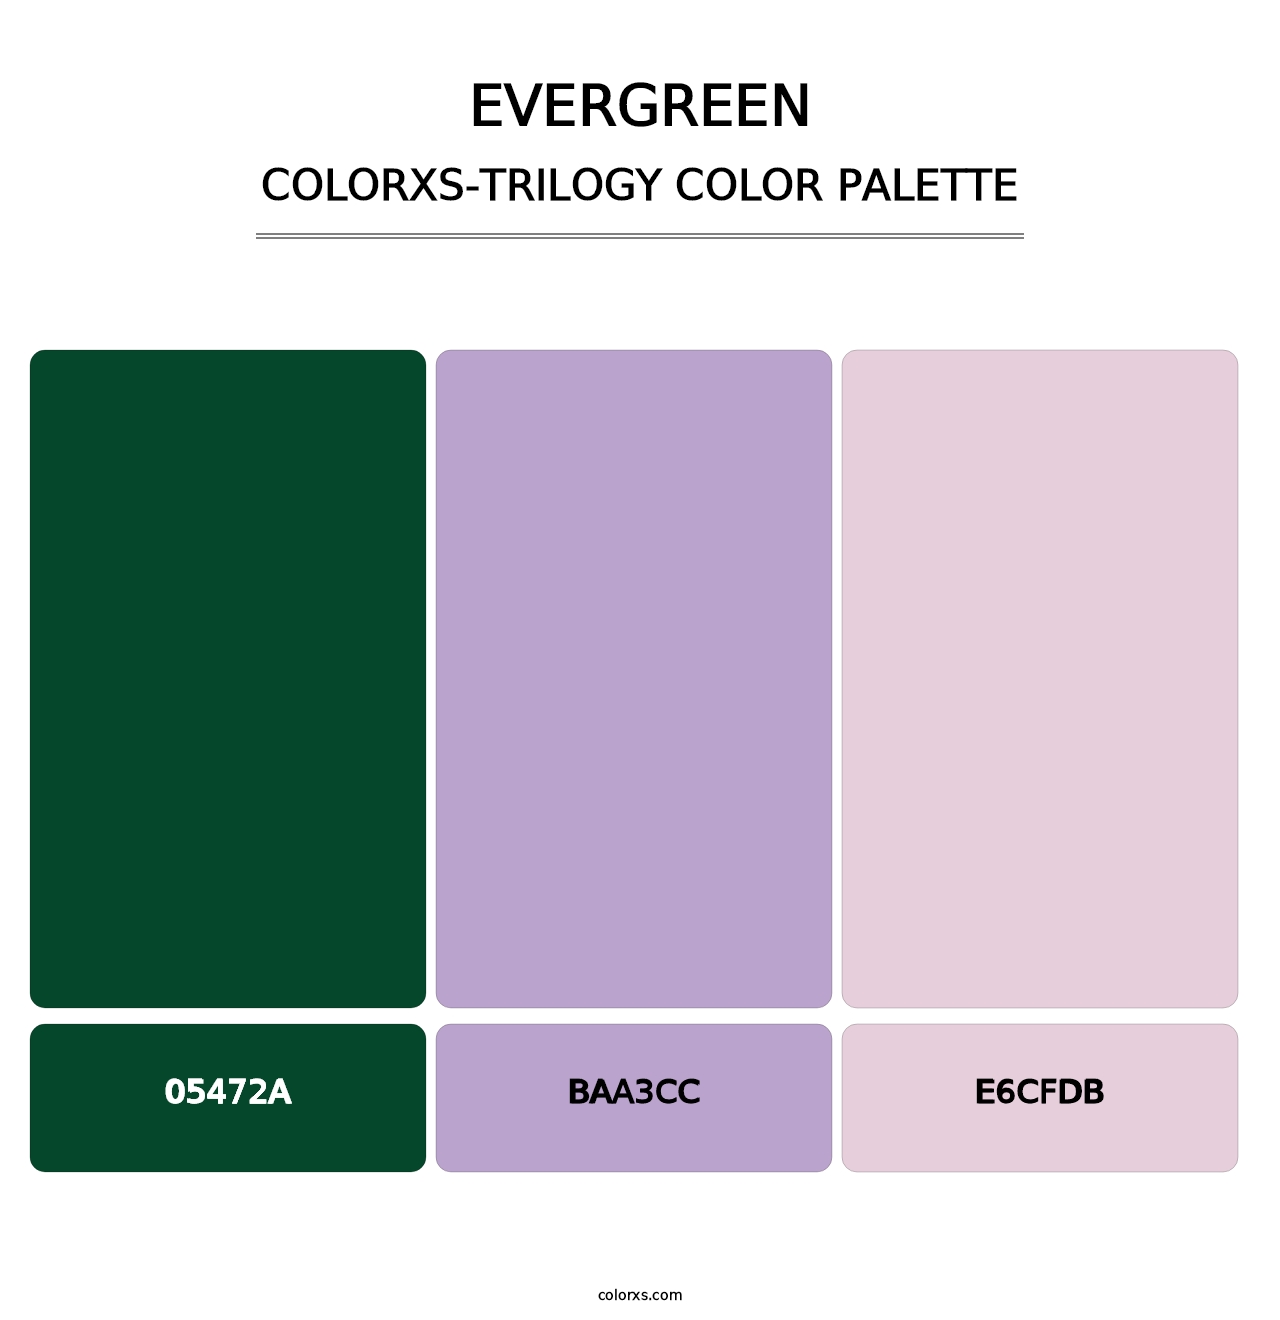 Evergreen - Colorxs Trilogy Palette